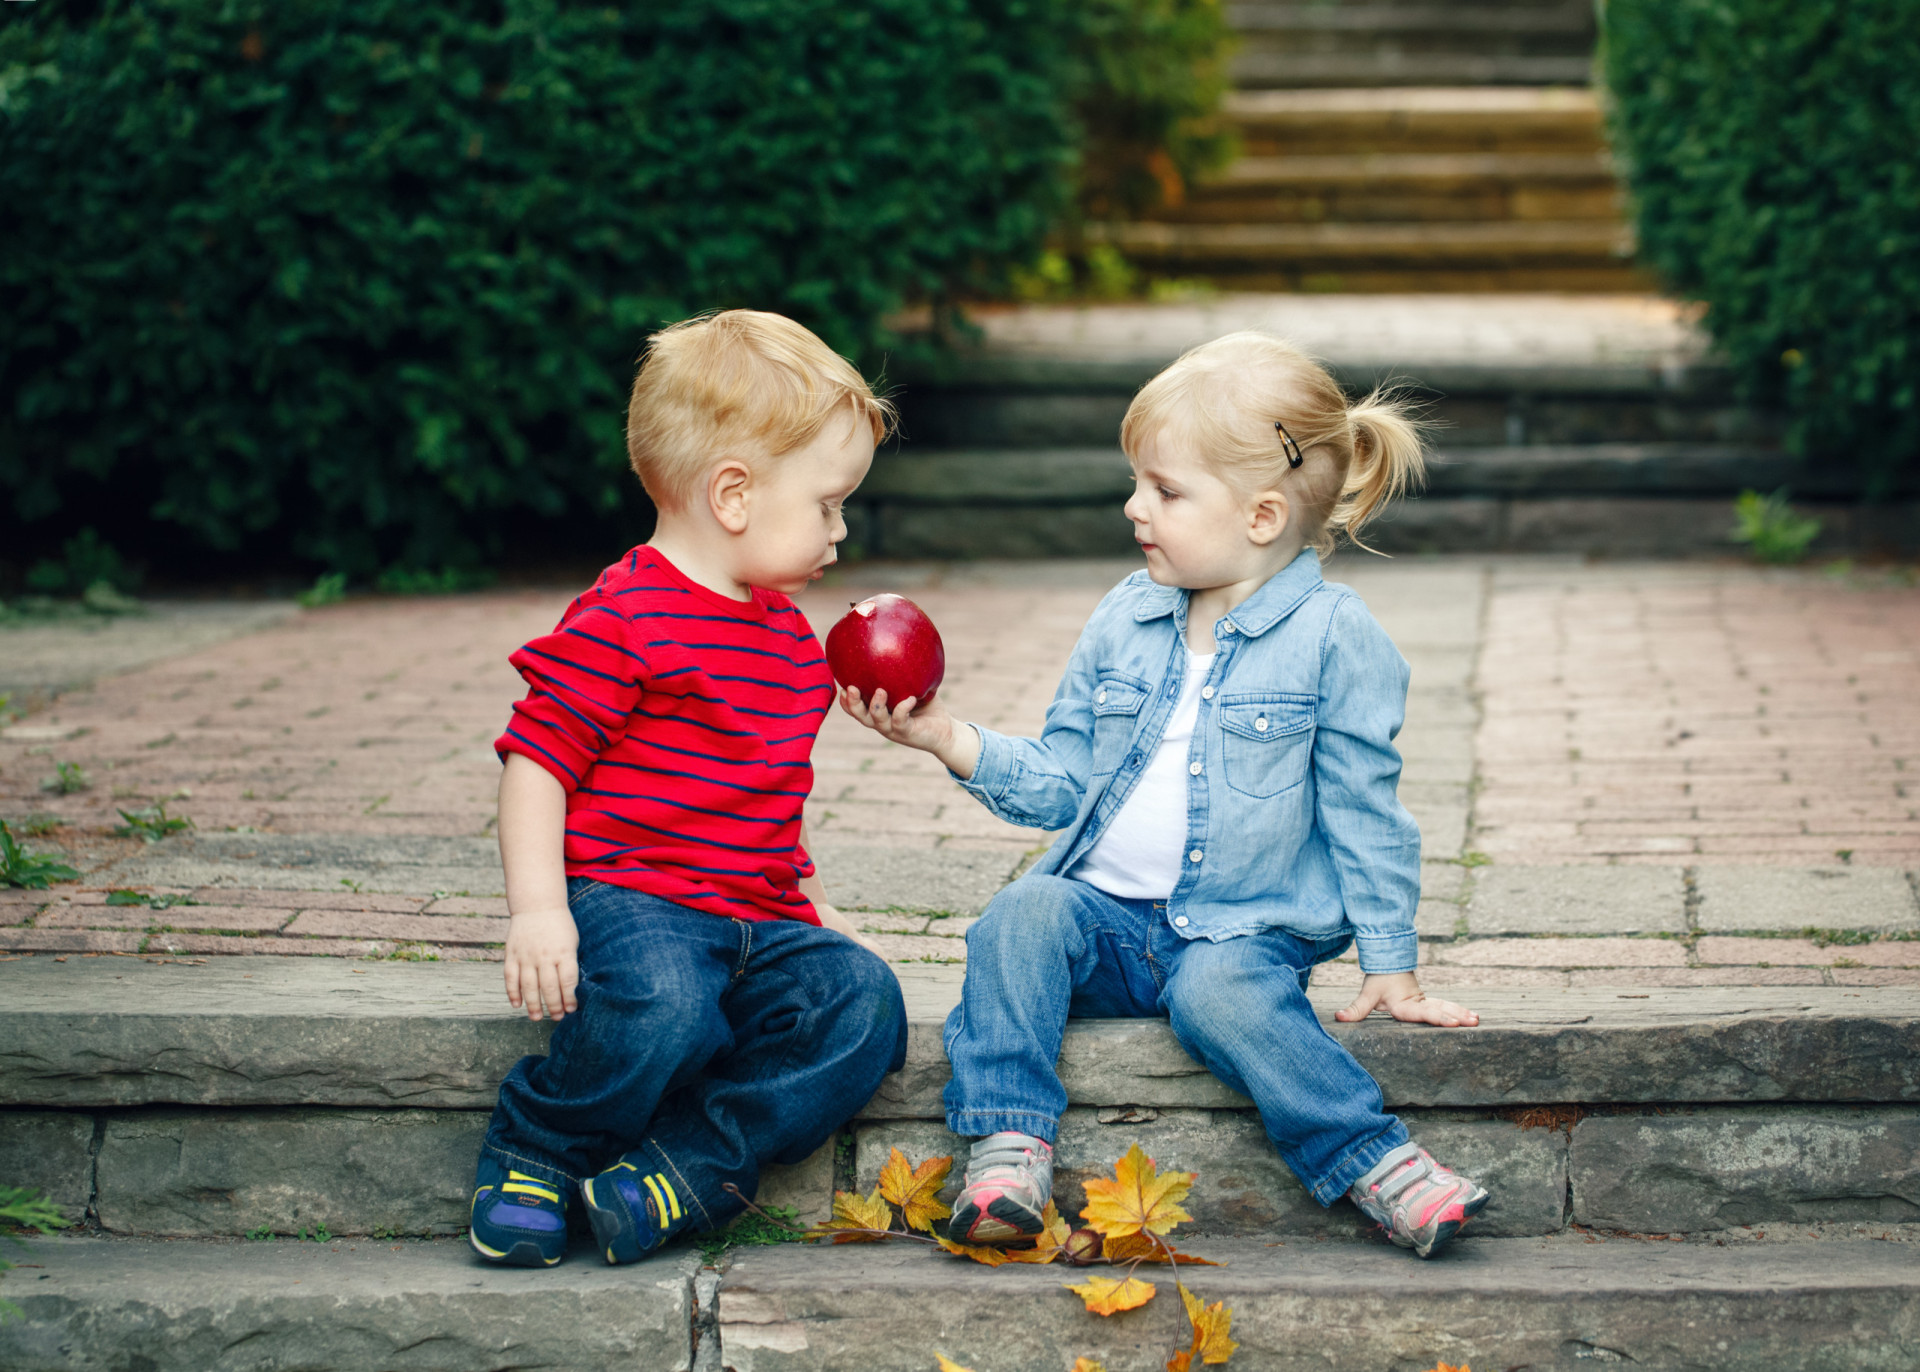 <p>Sharing isn't just about toys; it's a life lesson in kindness. Encouraging kids to share teaches them about empathy and cooperation, setting the stage for meaningful relationships.</p><p>You may also like:<a href="https://www.starsinsider.com/n/102011?utm_source=msn.com&utm_medium=display&utm_campaign=referral_description&utm_content=588009en-en"> The most dangerous tourist attractions in the world</a></p>